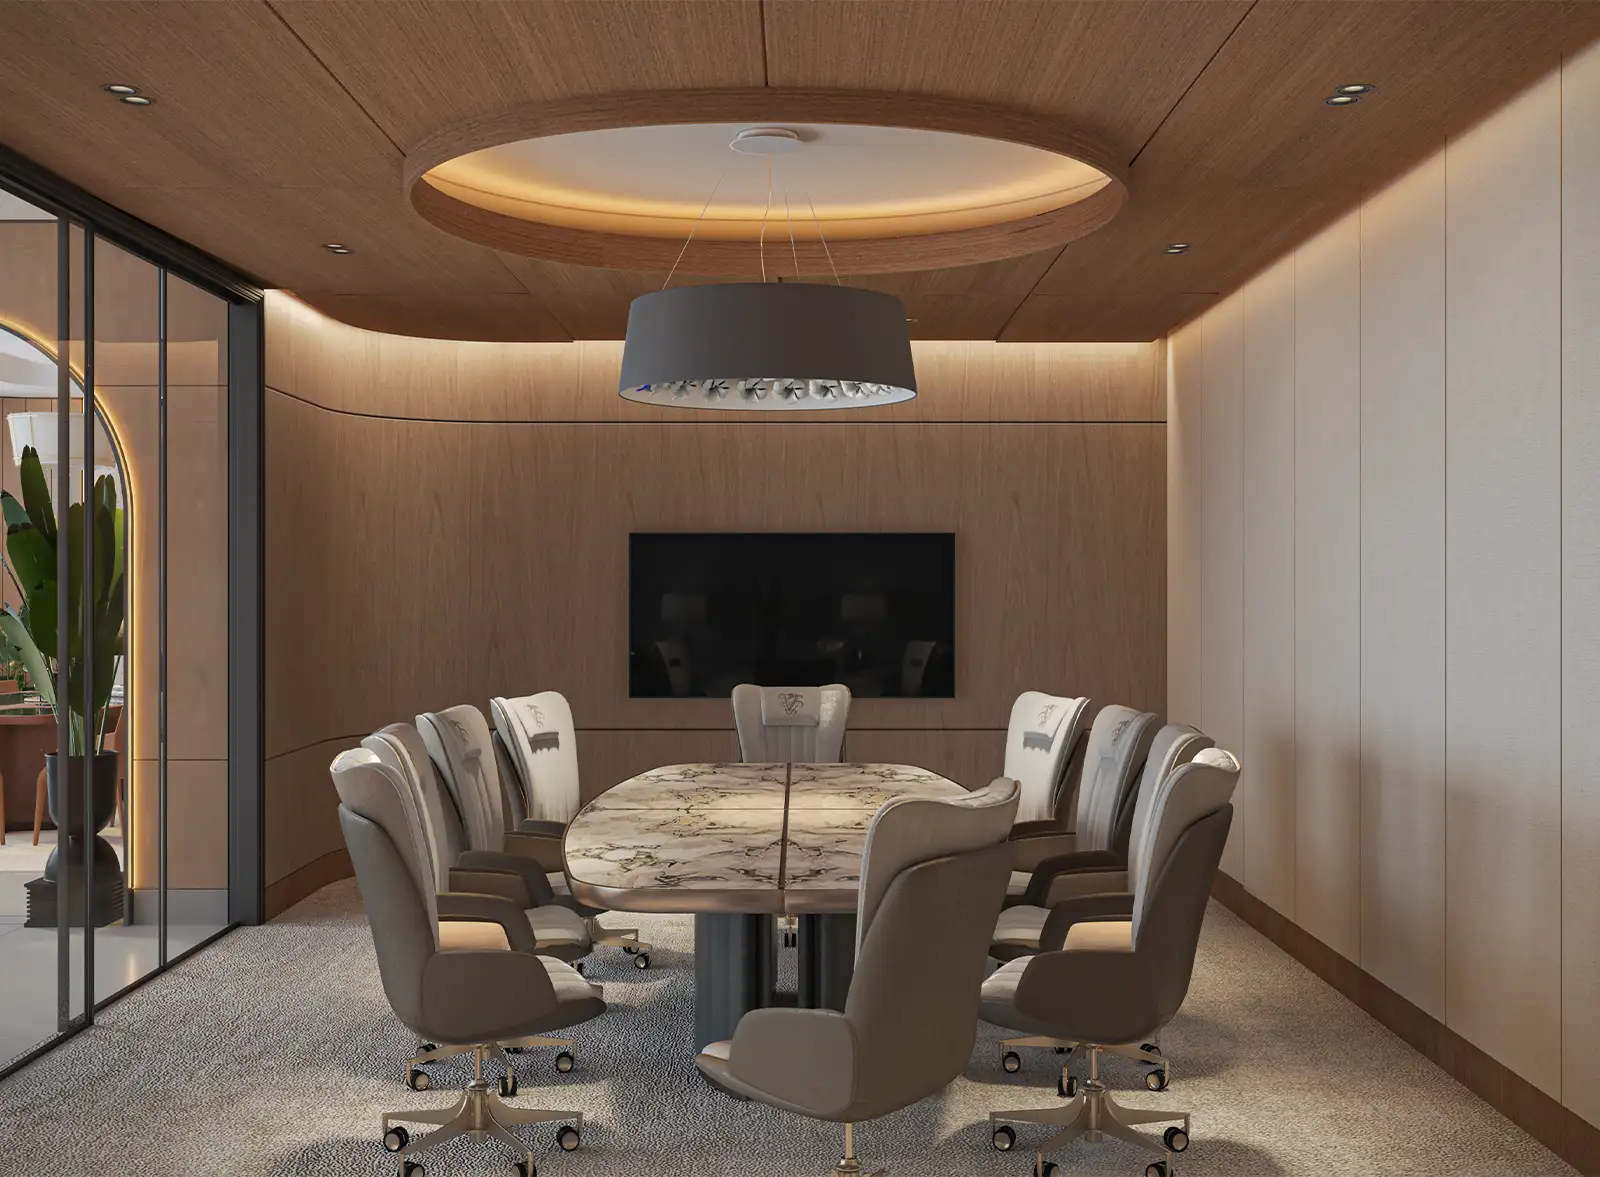 Modern meeting room with a marble table, plush rolling chairs, and a statement pendant light, encapsulating a sophisticated and functional interior design.